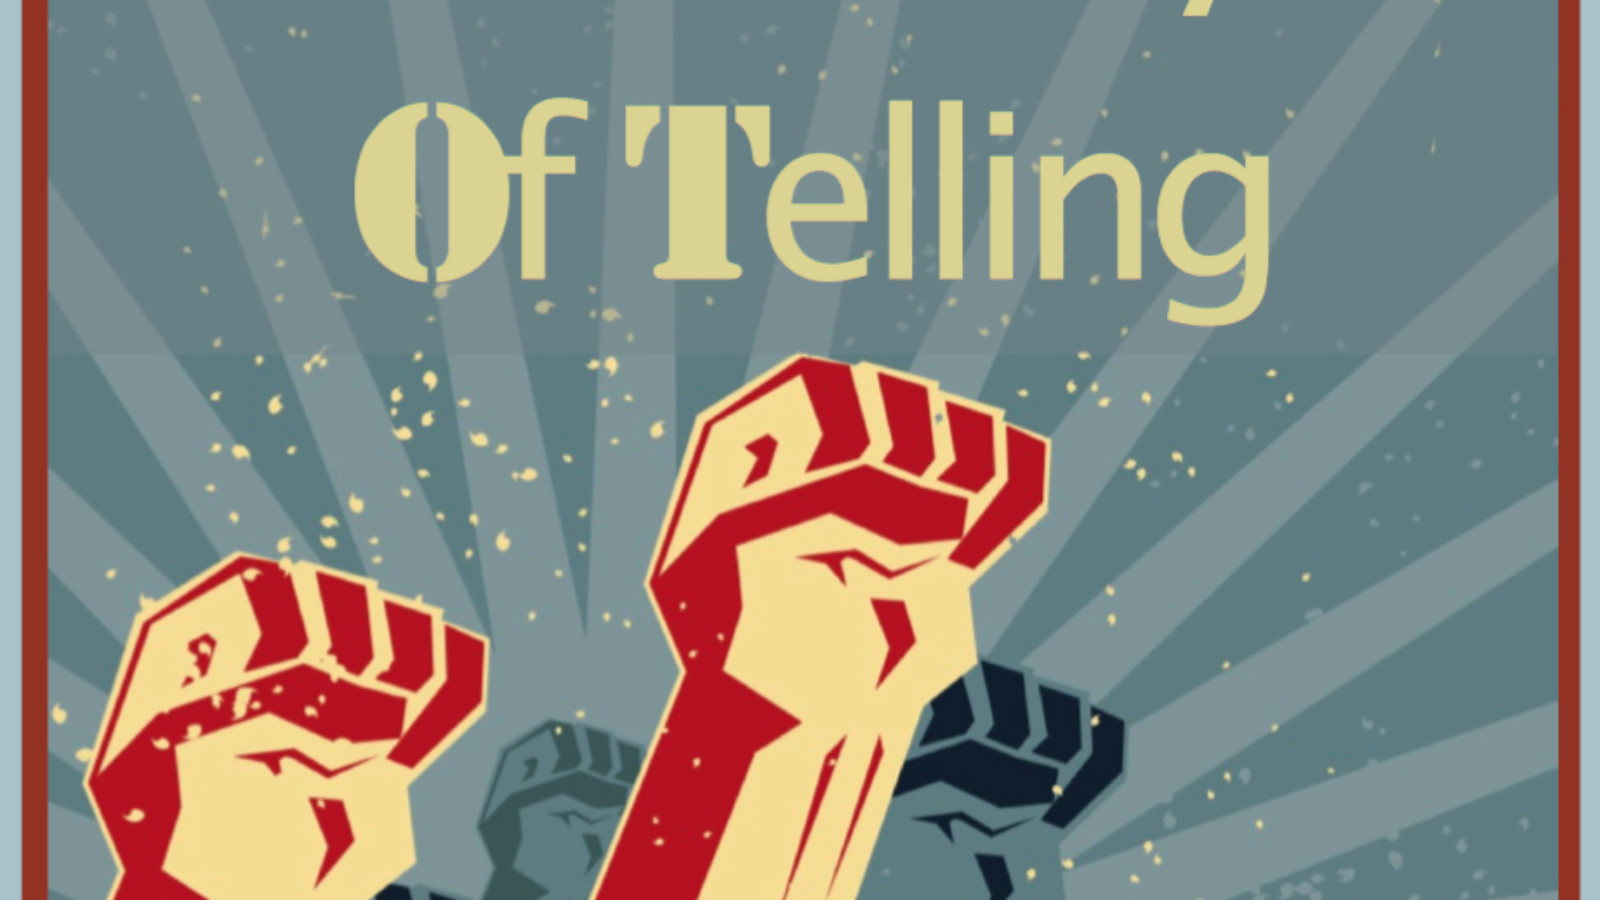 An illustration in the style of a revolution poster with red and black fists pointing towards the sky. The words 'Other Ways of Telling' are printed at the top of the image.